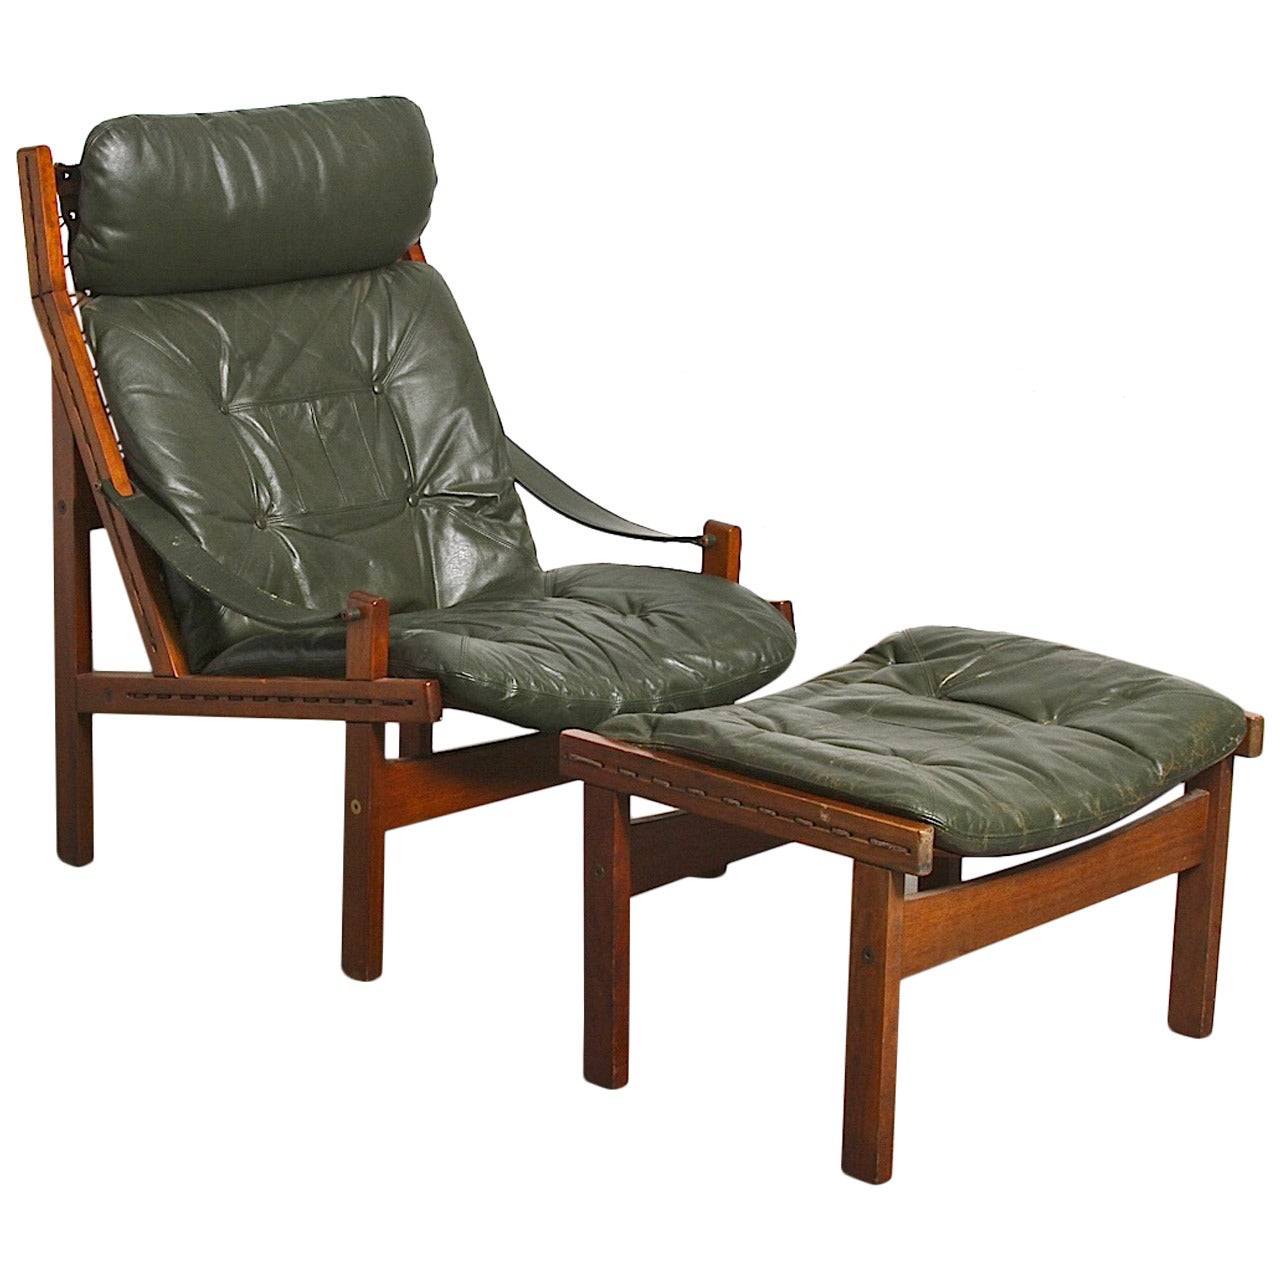 Westnofa (Attributed) Lounge Chair and Ottoman